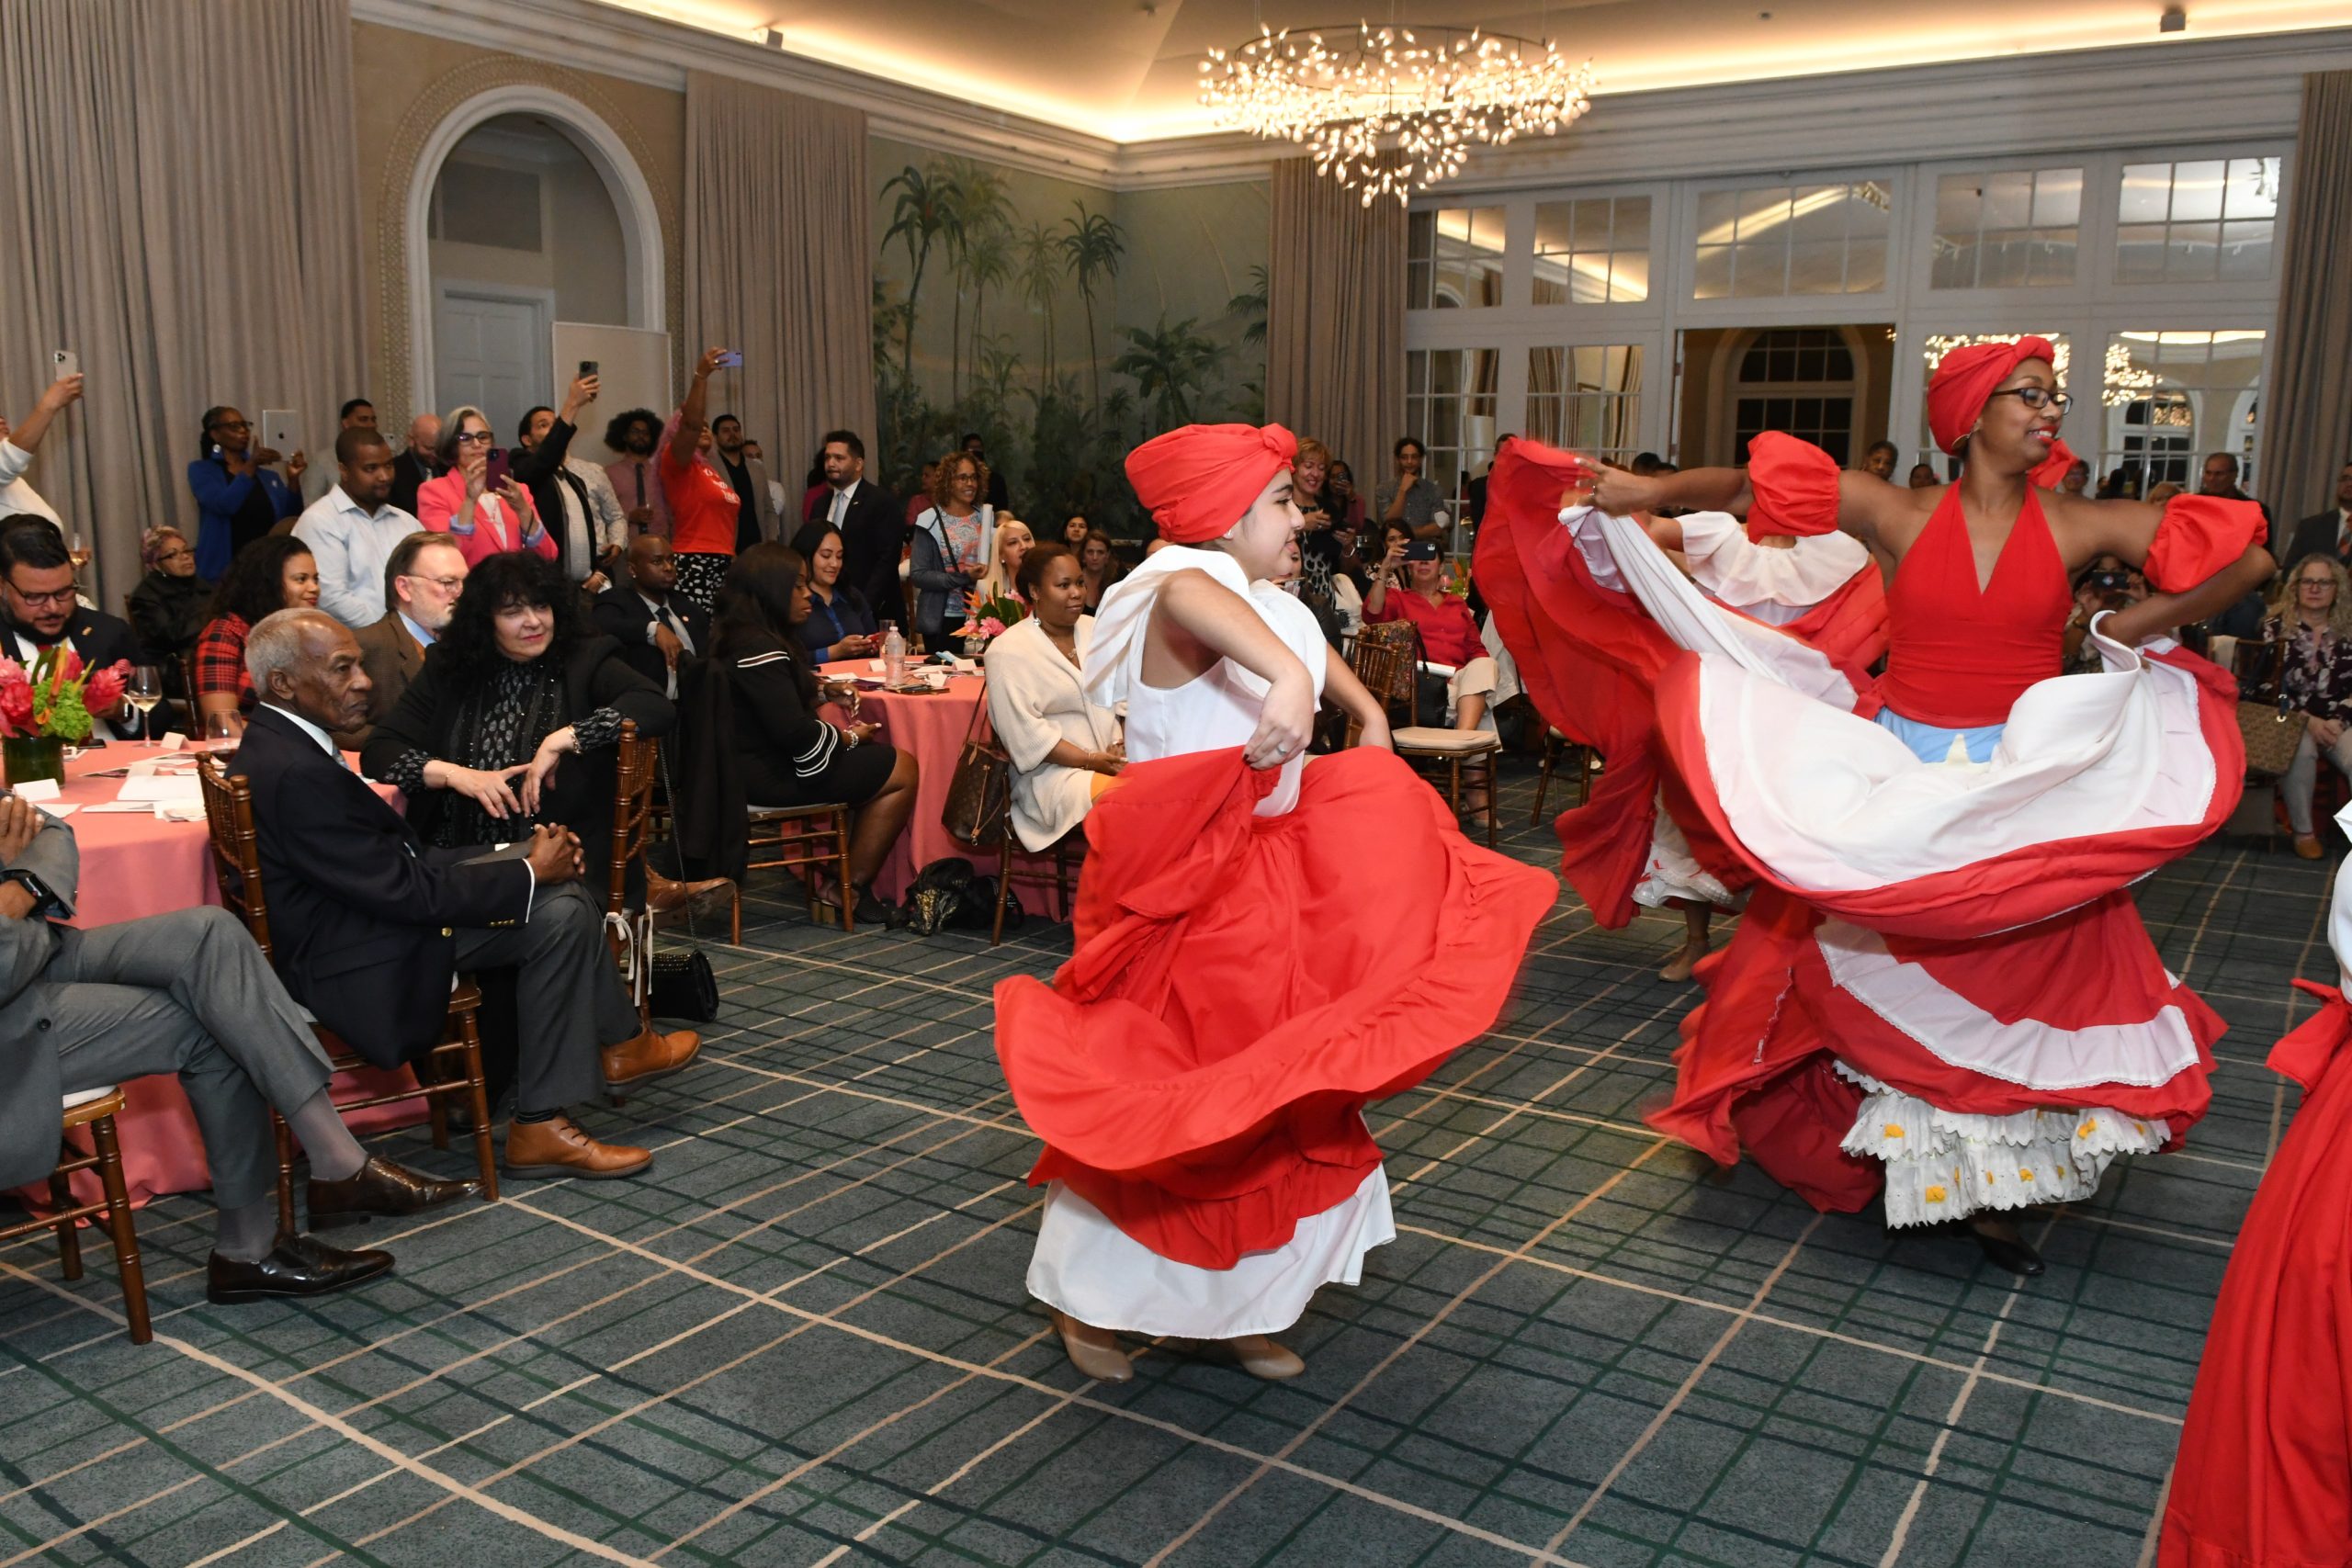 Women in red and white dresses spin in a dance for entertained visitors